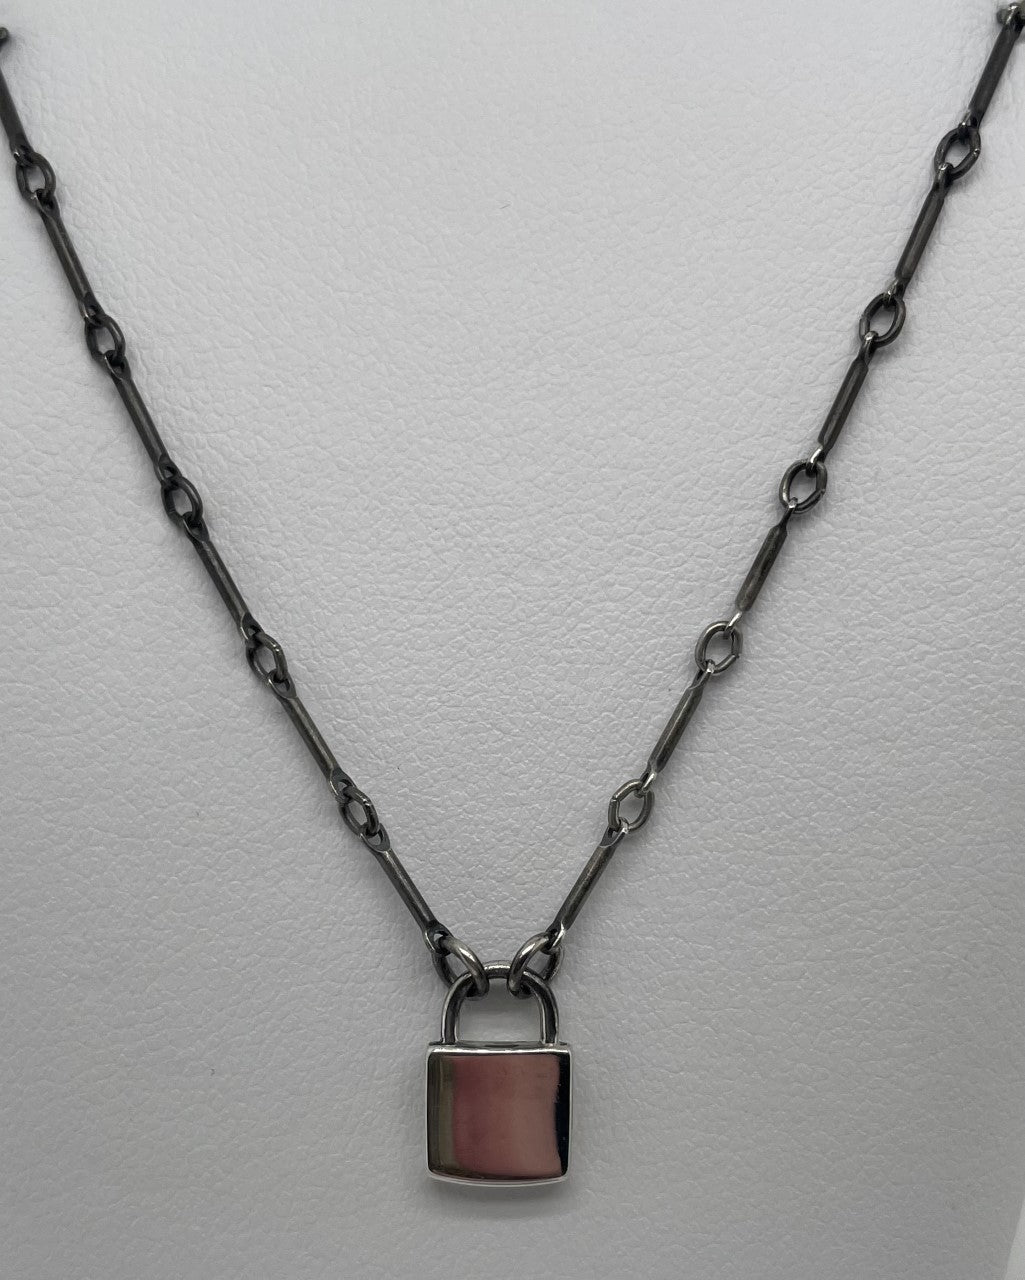 OXIDIZED BAR LINK CHAIN WITH LOCK PENDANT